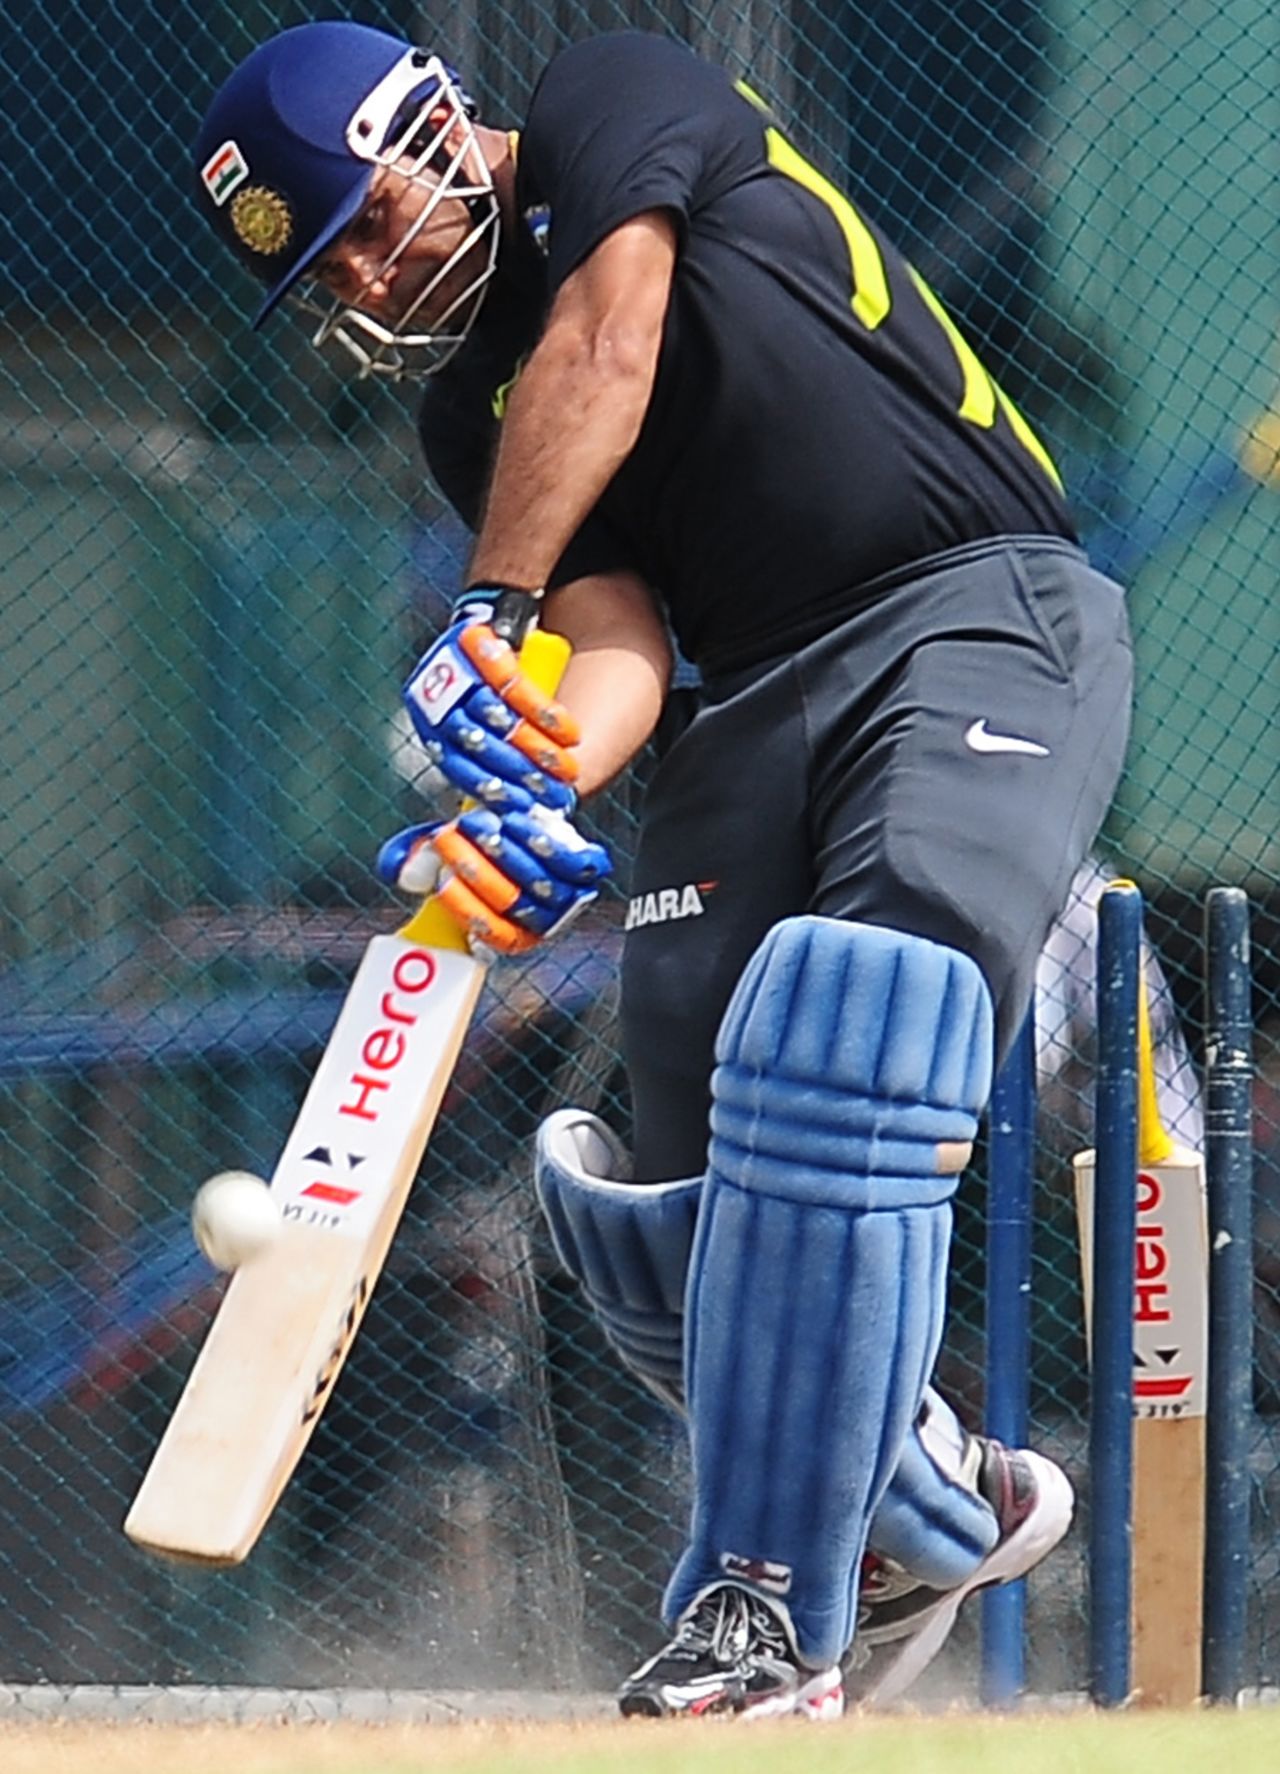 Virender Sehwag bats in a training session, Colombo, July 30, 2012